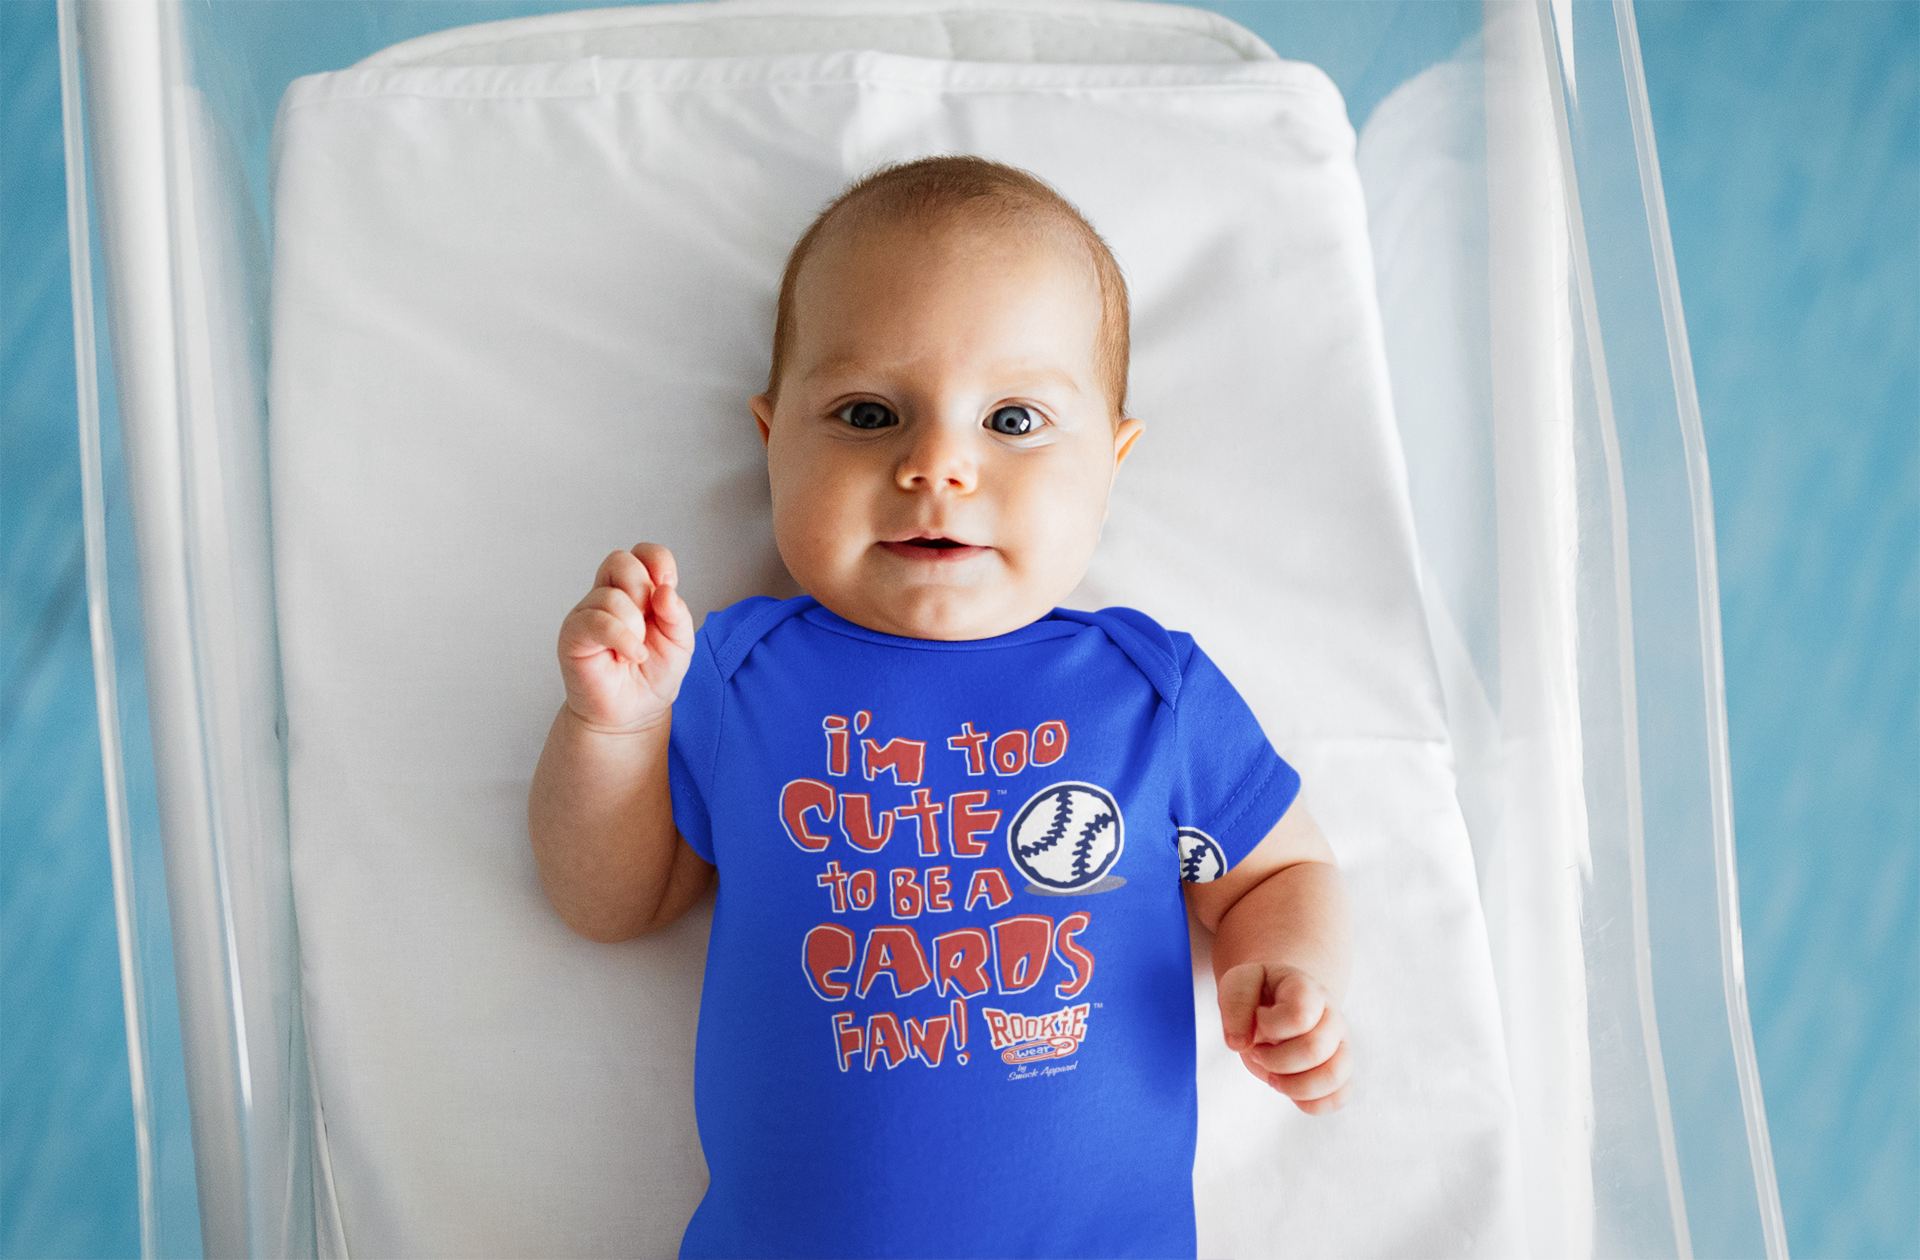 Rookie Wear by Smack Apparel St Louis Baseball Fans. I'm Too Cute Onesie (NB-18M) or Toddler Tee (2T-4T)